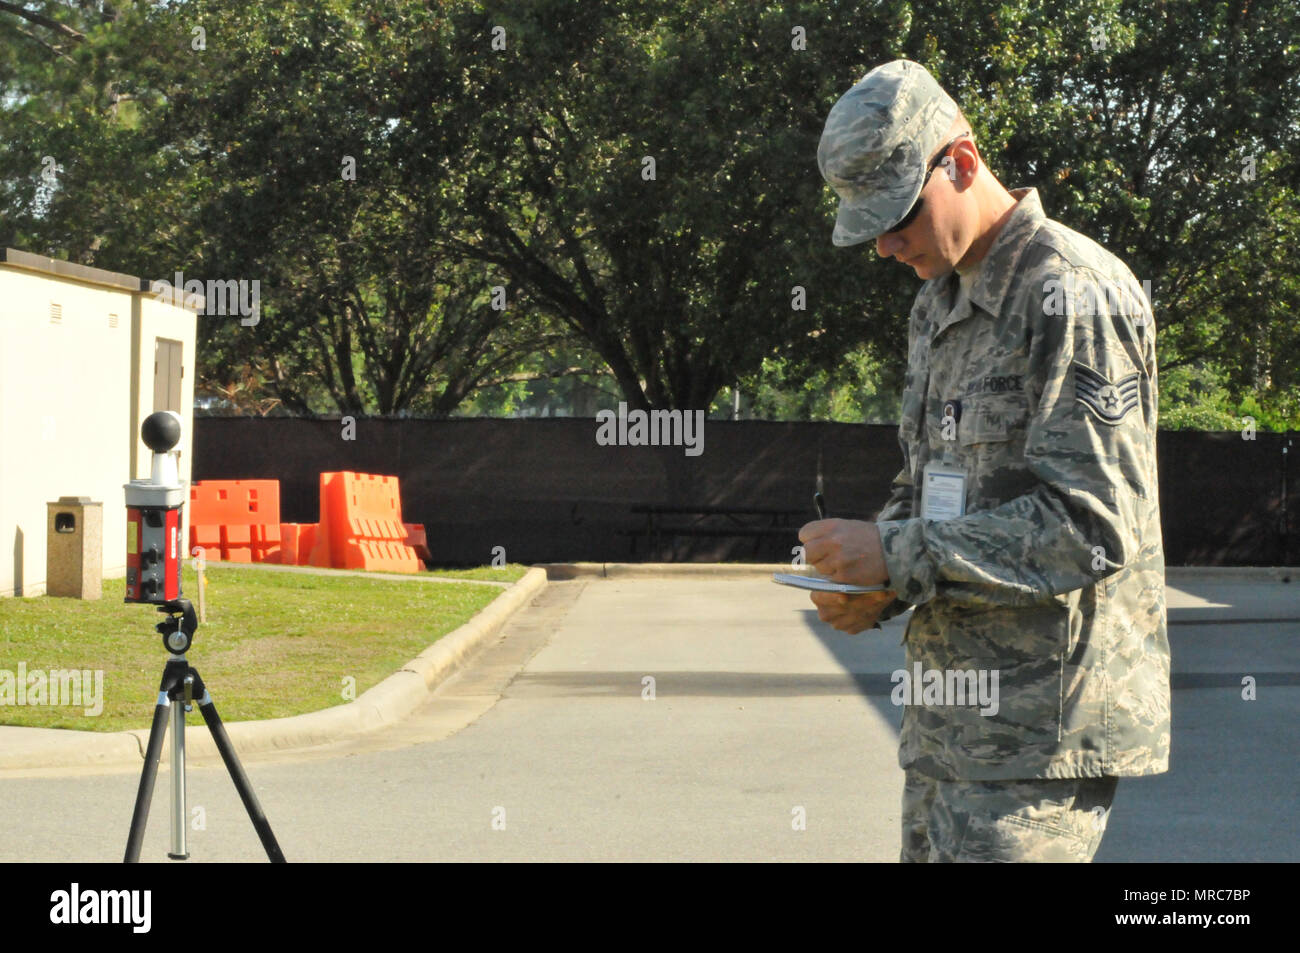 Staff Sgt. Casey Crump records readings from a Wet Bulb Globe Temperature at Seymour Johnson Air Force Base during a June exercise. The WBGT instument is used to determine relative humidity and  outside temperature. It also helps monitor flag readings to determine how long service members can stay outside before getting overheated. (U.S. Air Force photo by Tech. Sgt. Terrica Y. Jones) Stock Photo